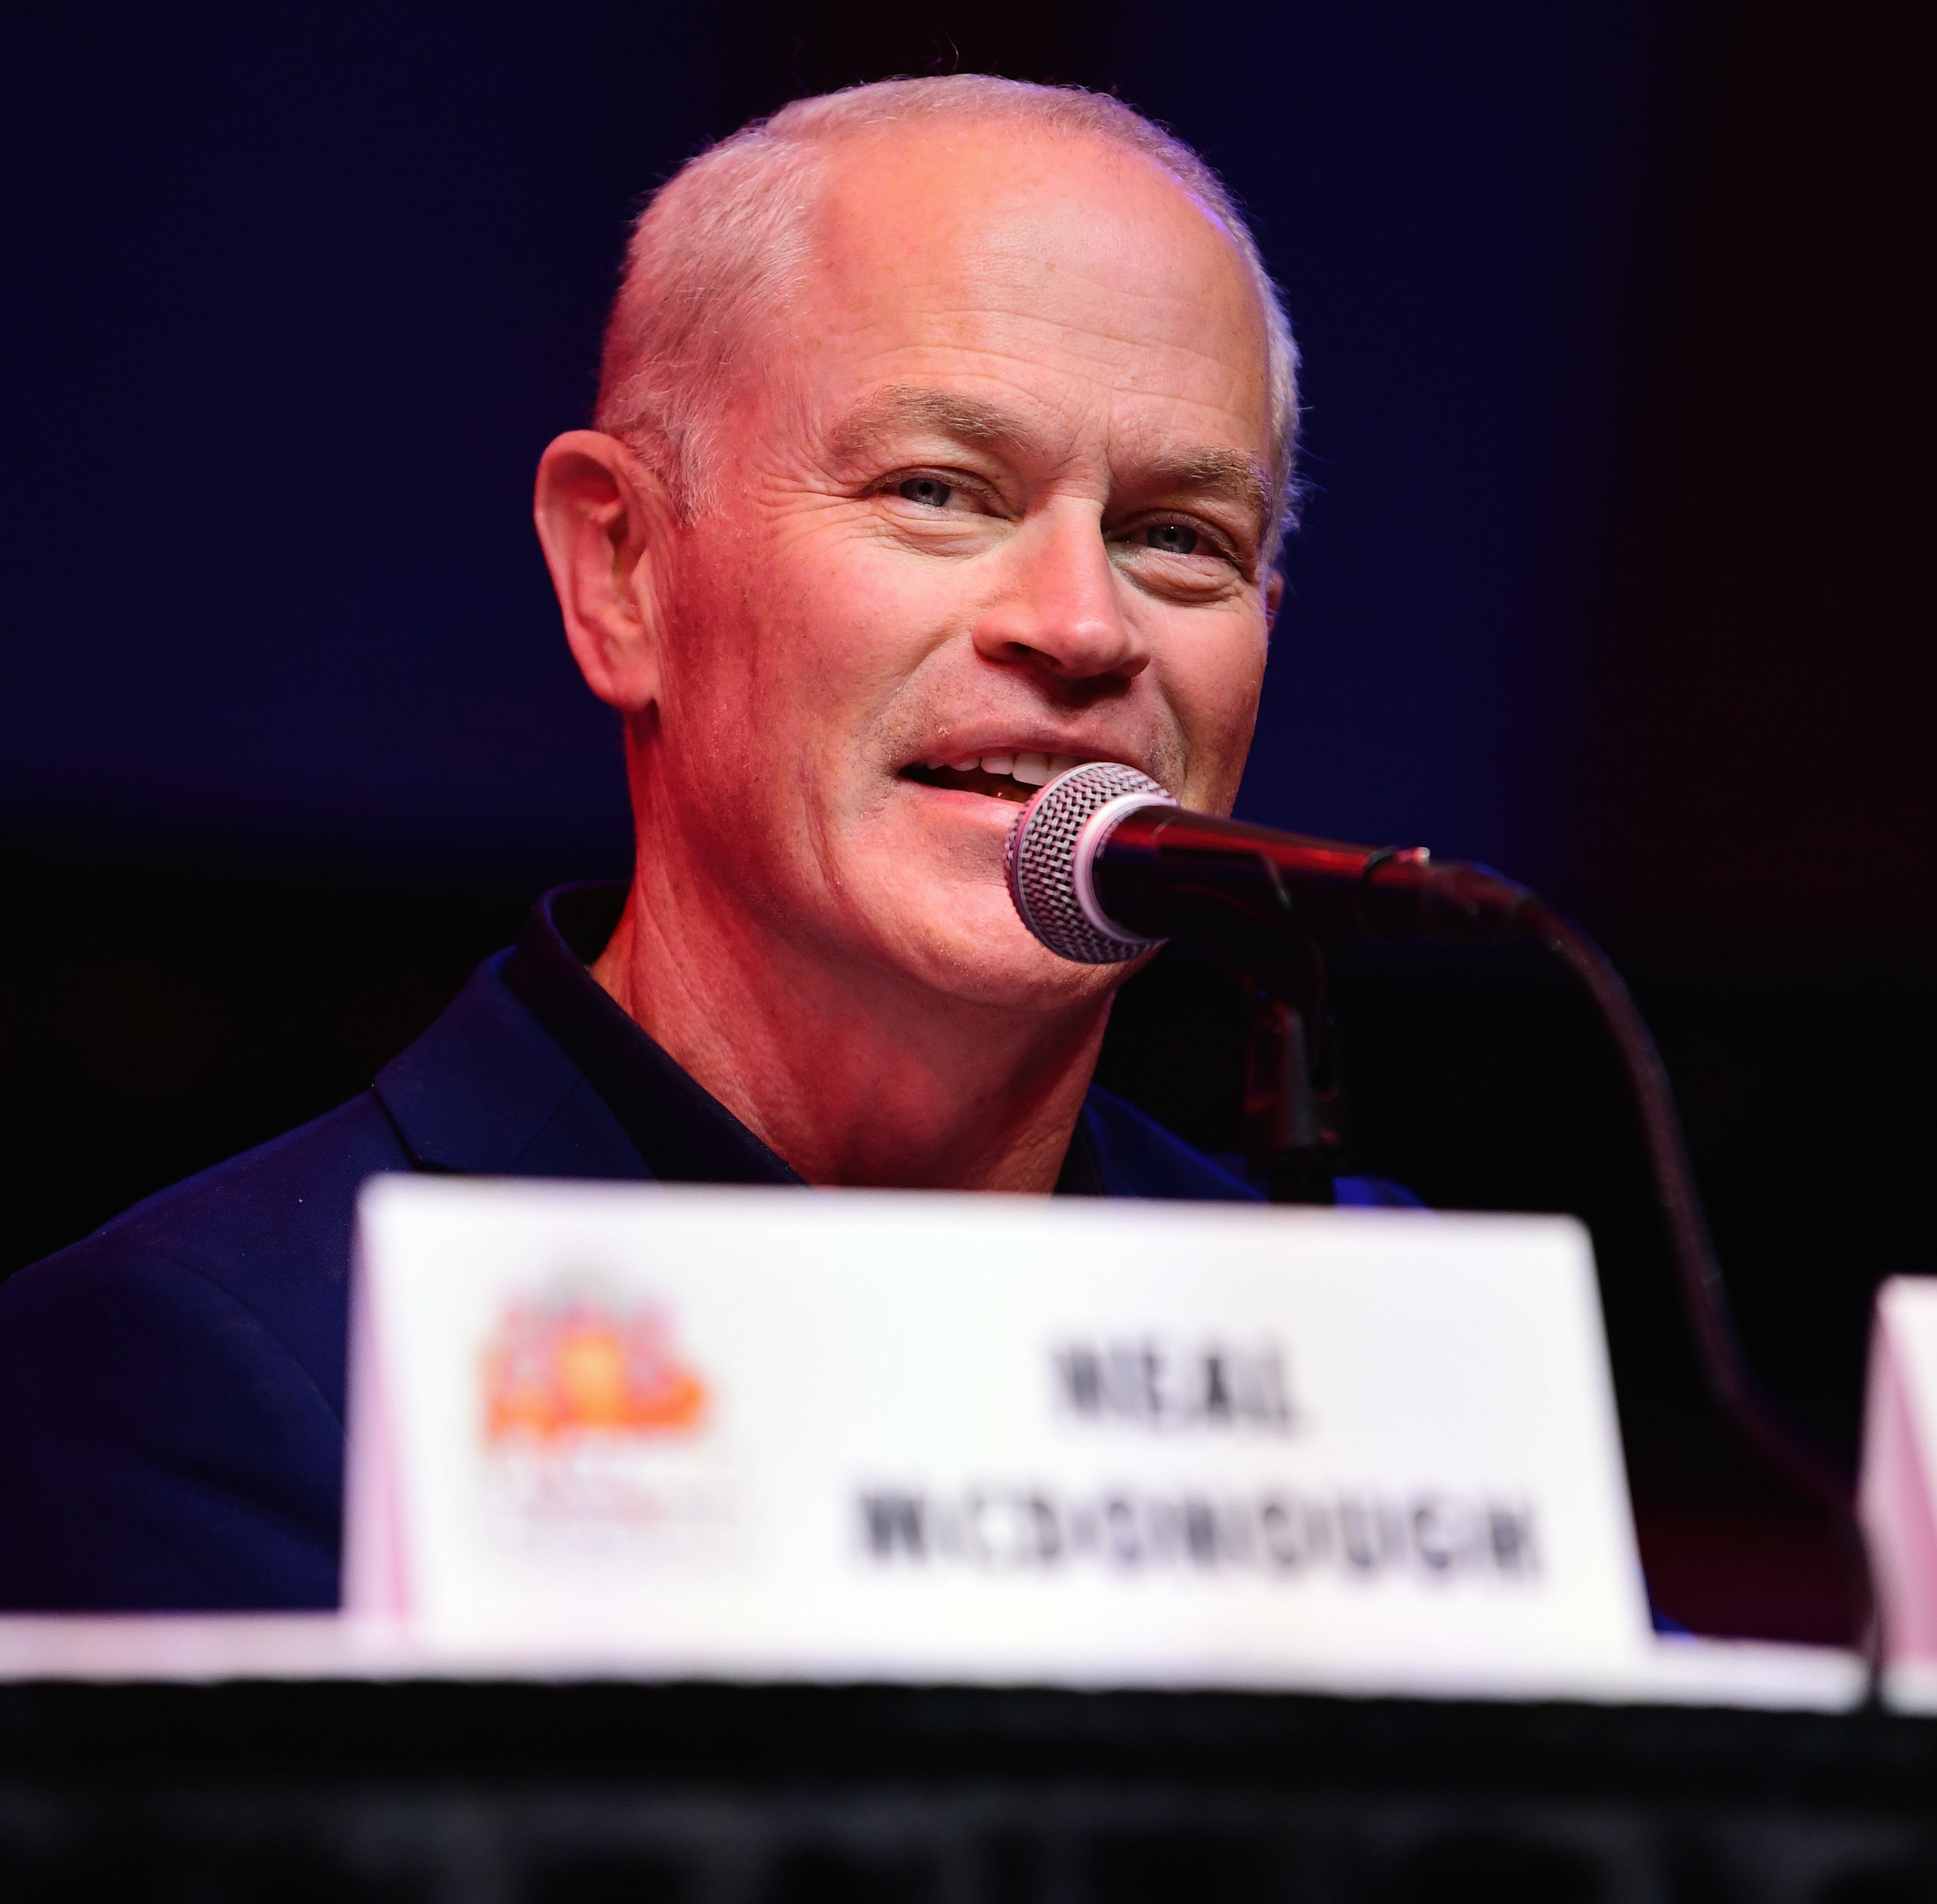 Neal McDonough on an "Arrow" panel at Comic Con in late 2021